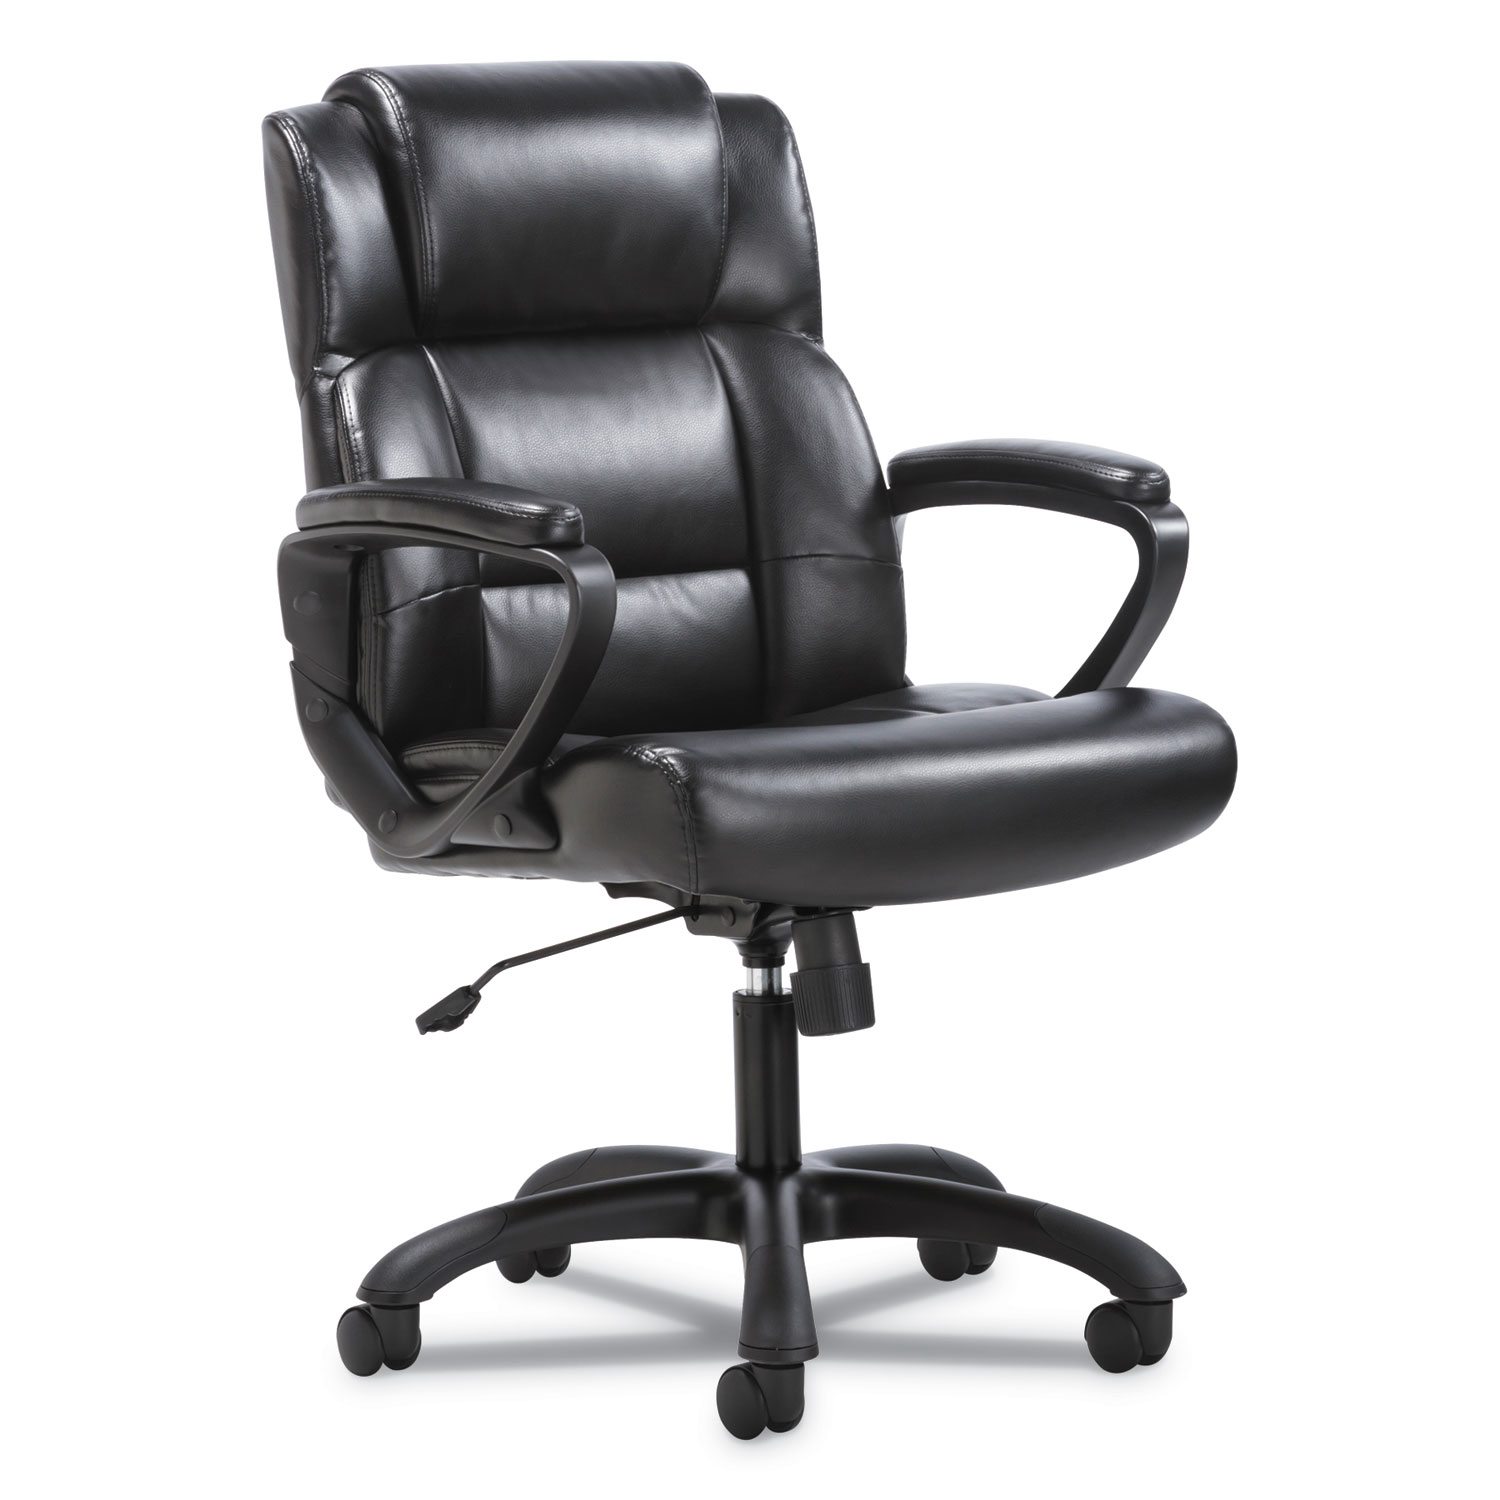  Sadie HVST305 Mid-Back Executive Chair, Supports up to 250 lbs., Black Seat/Black Back, Black Base (BSXVST305) 